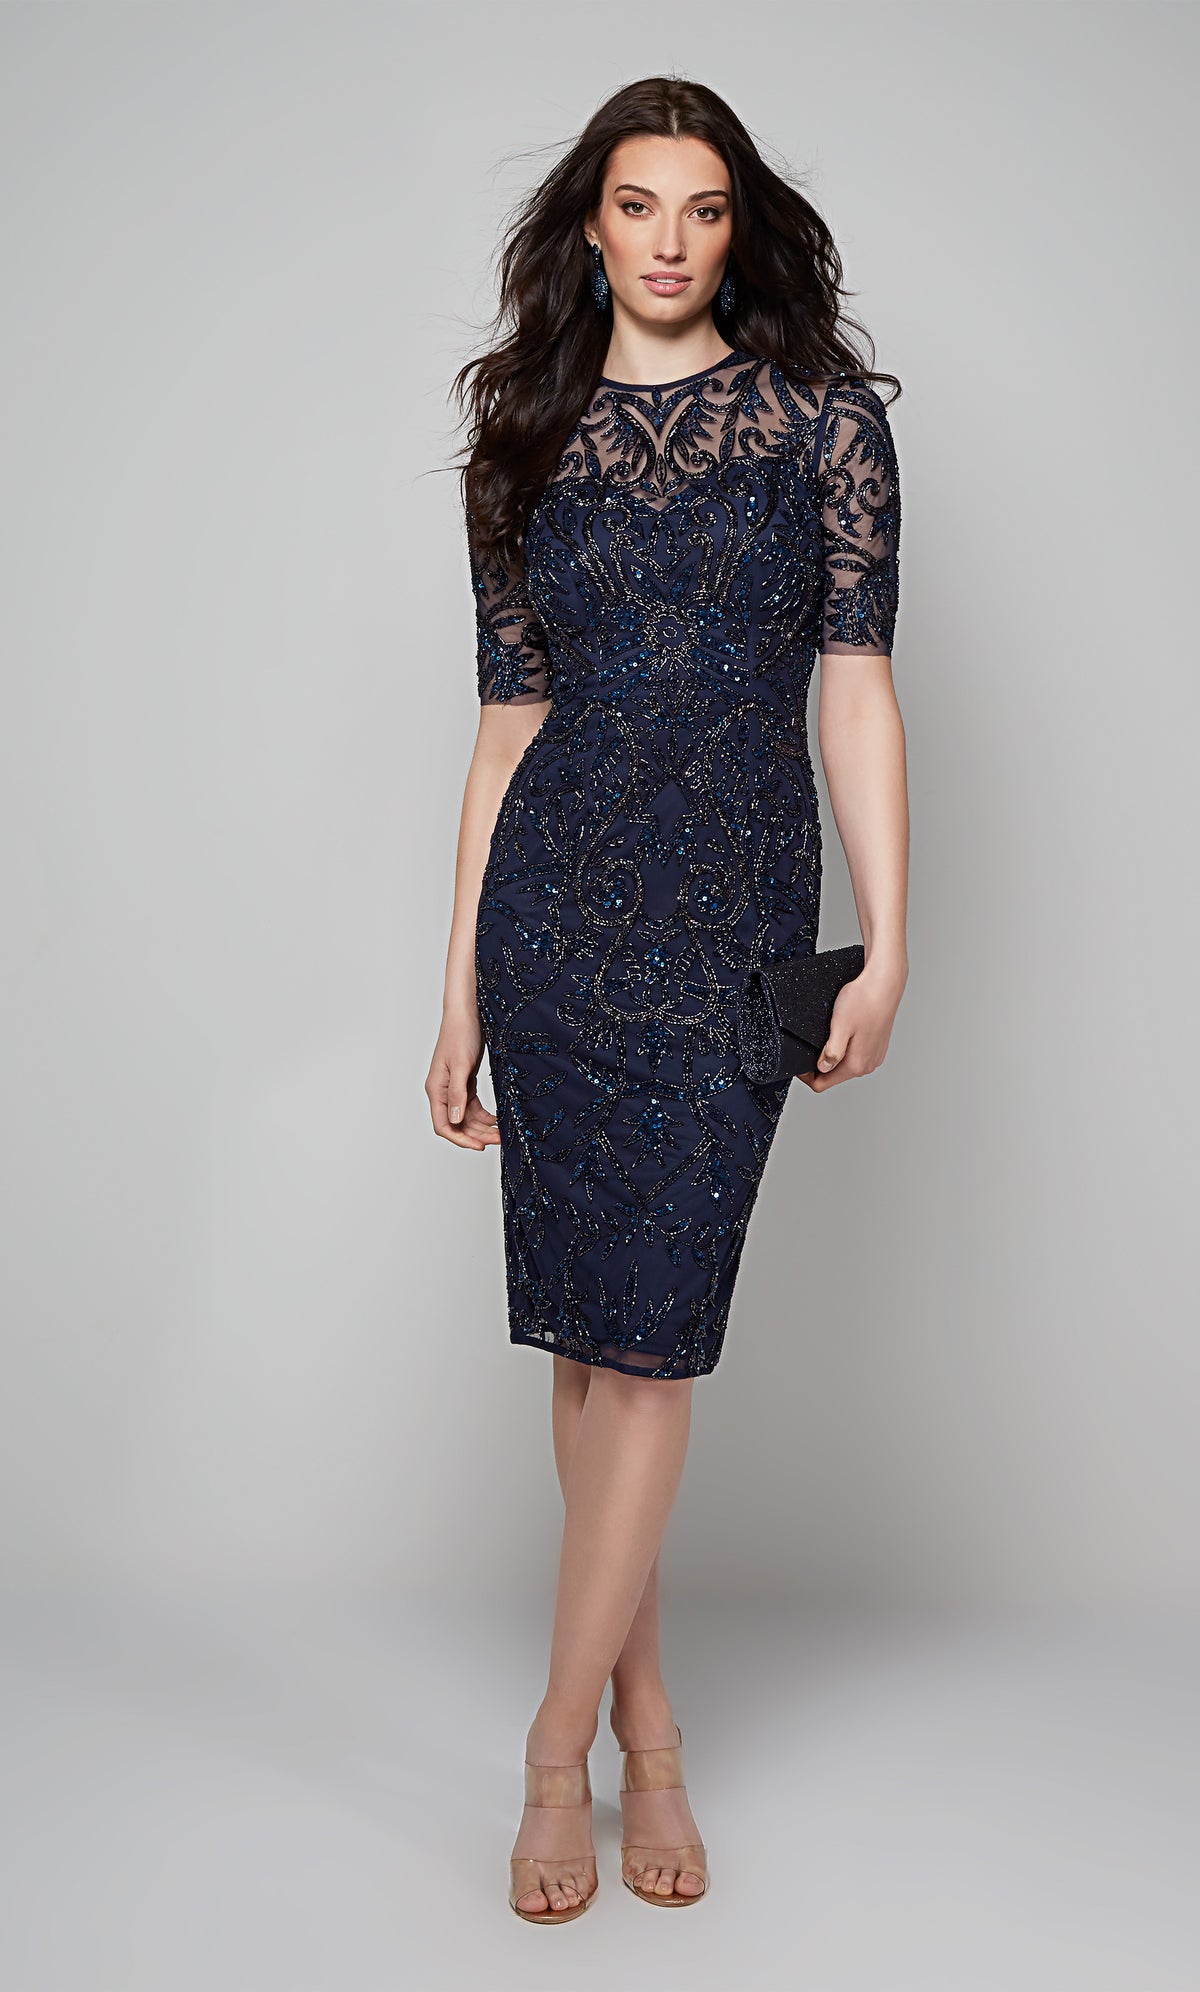 Embellished cocktail dress with short sleeves in midnight blue.